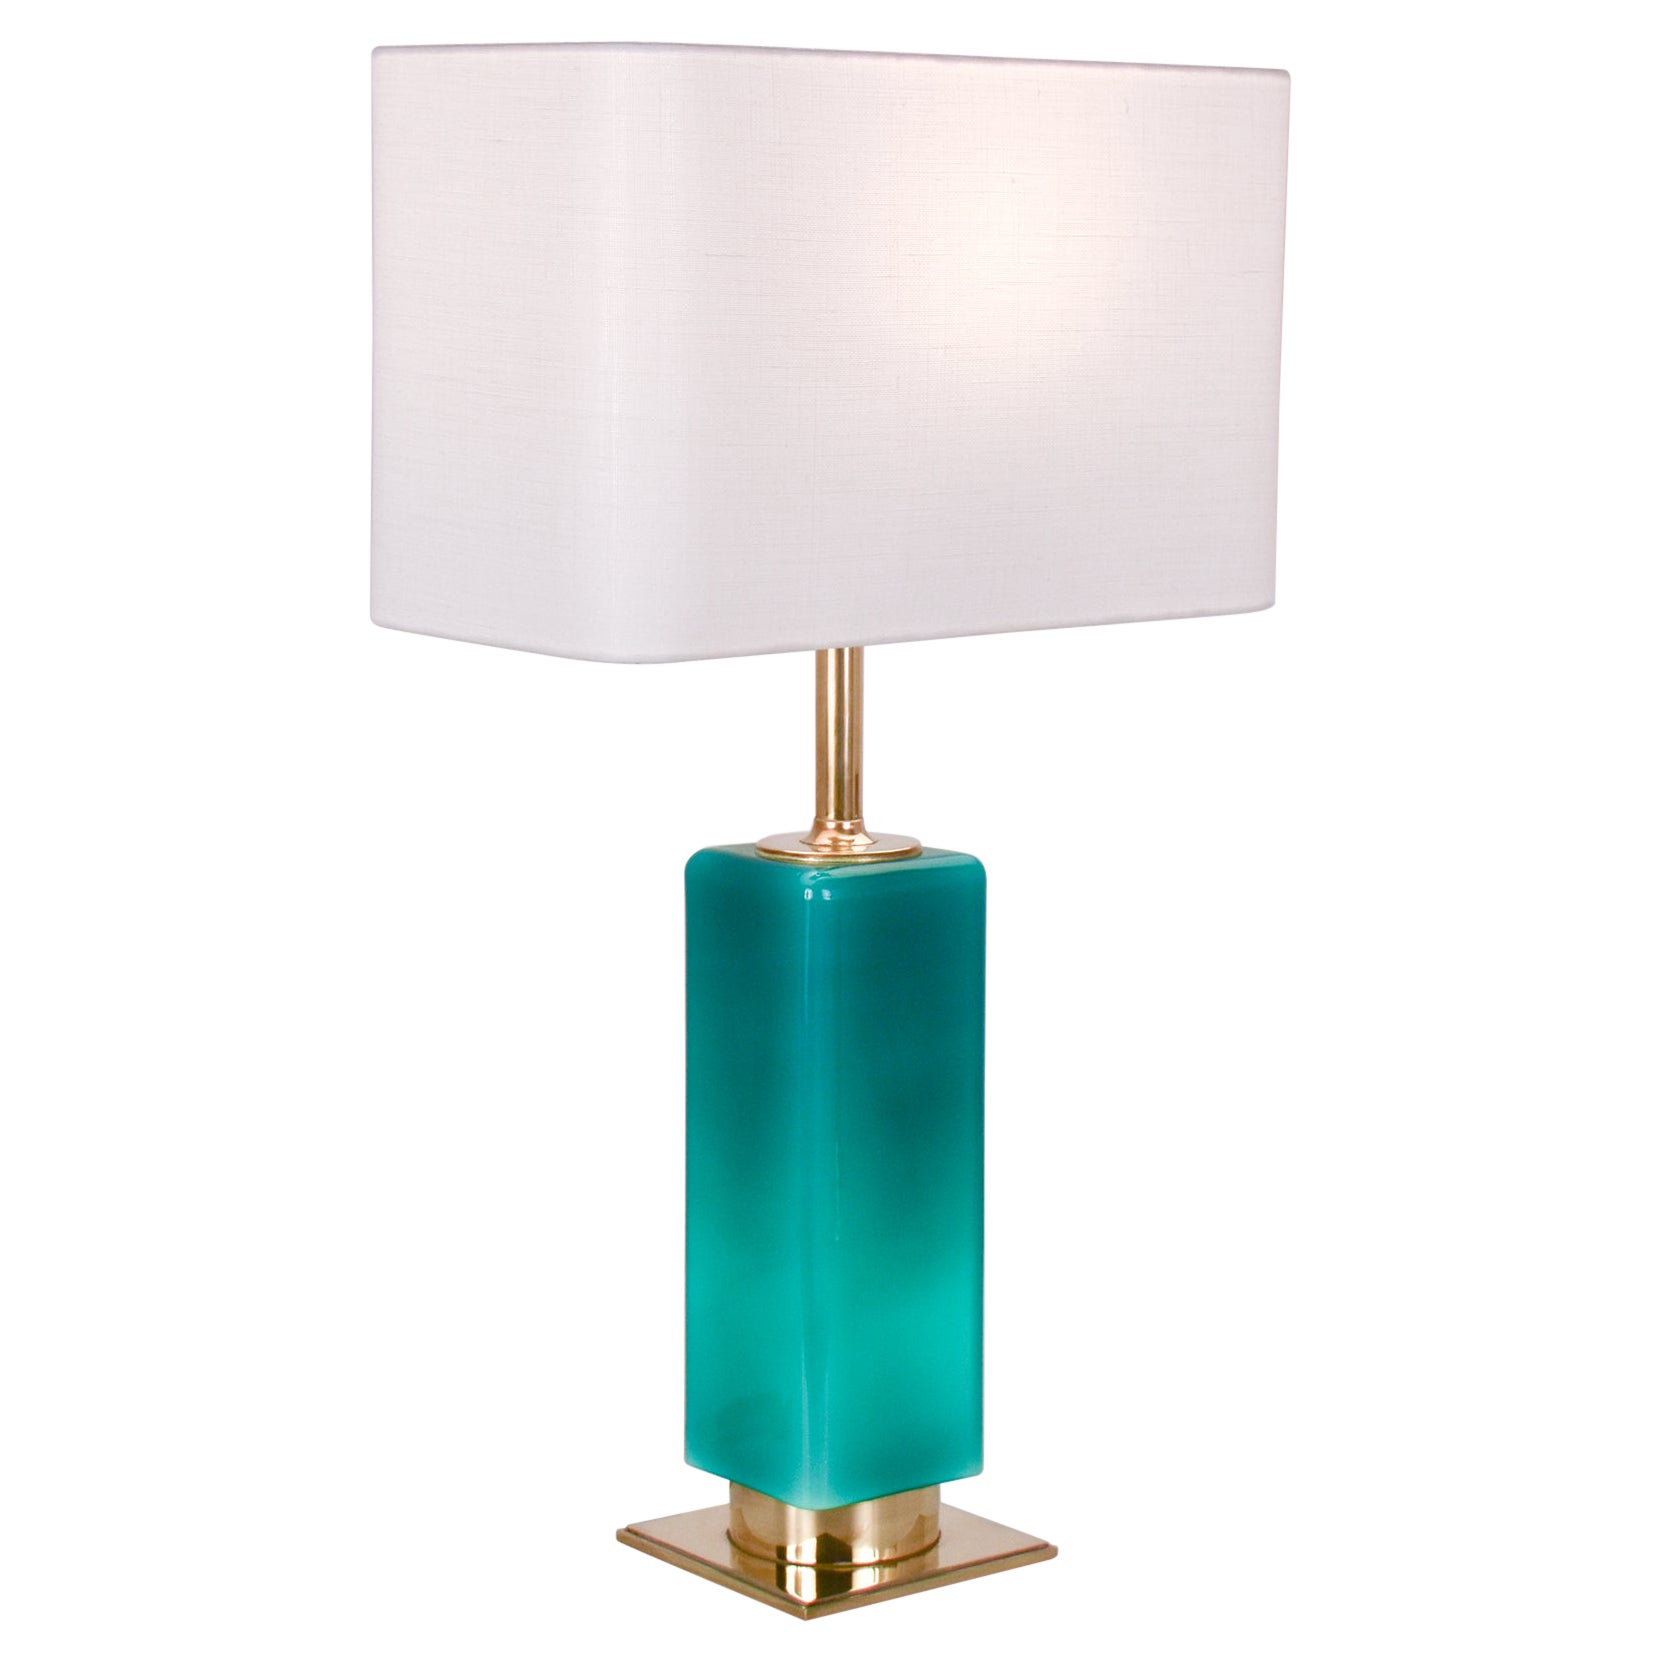 Mid- Century Large Green Glass and Brass Table Lamp Metalarte, Spain, 1970's For Sale